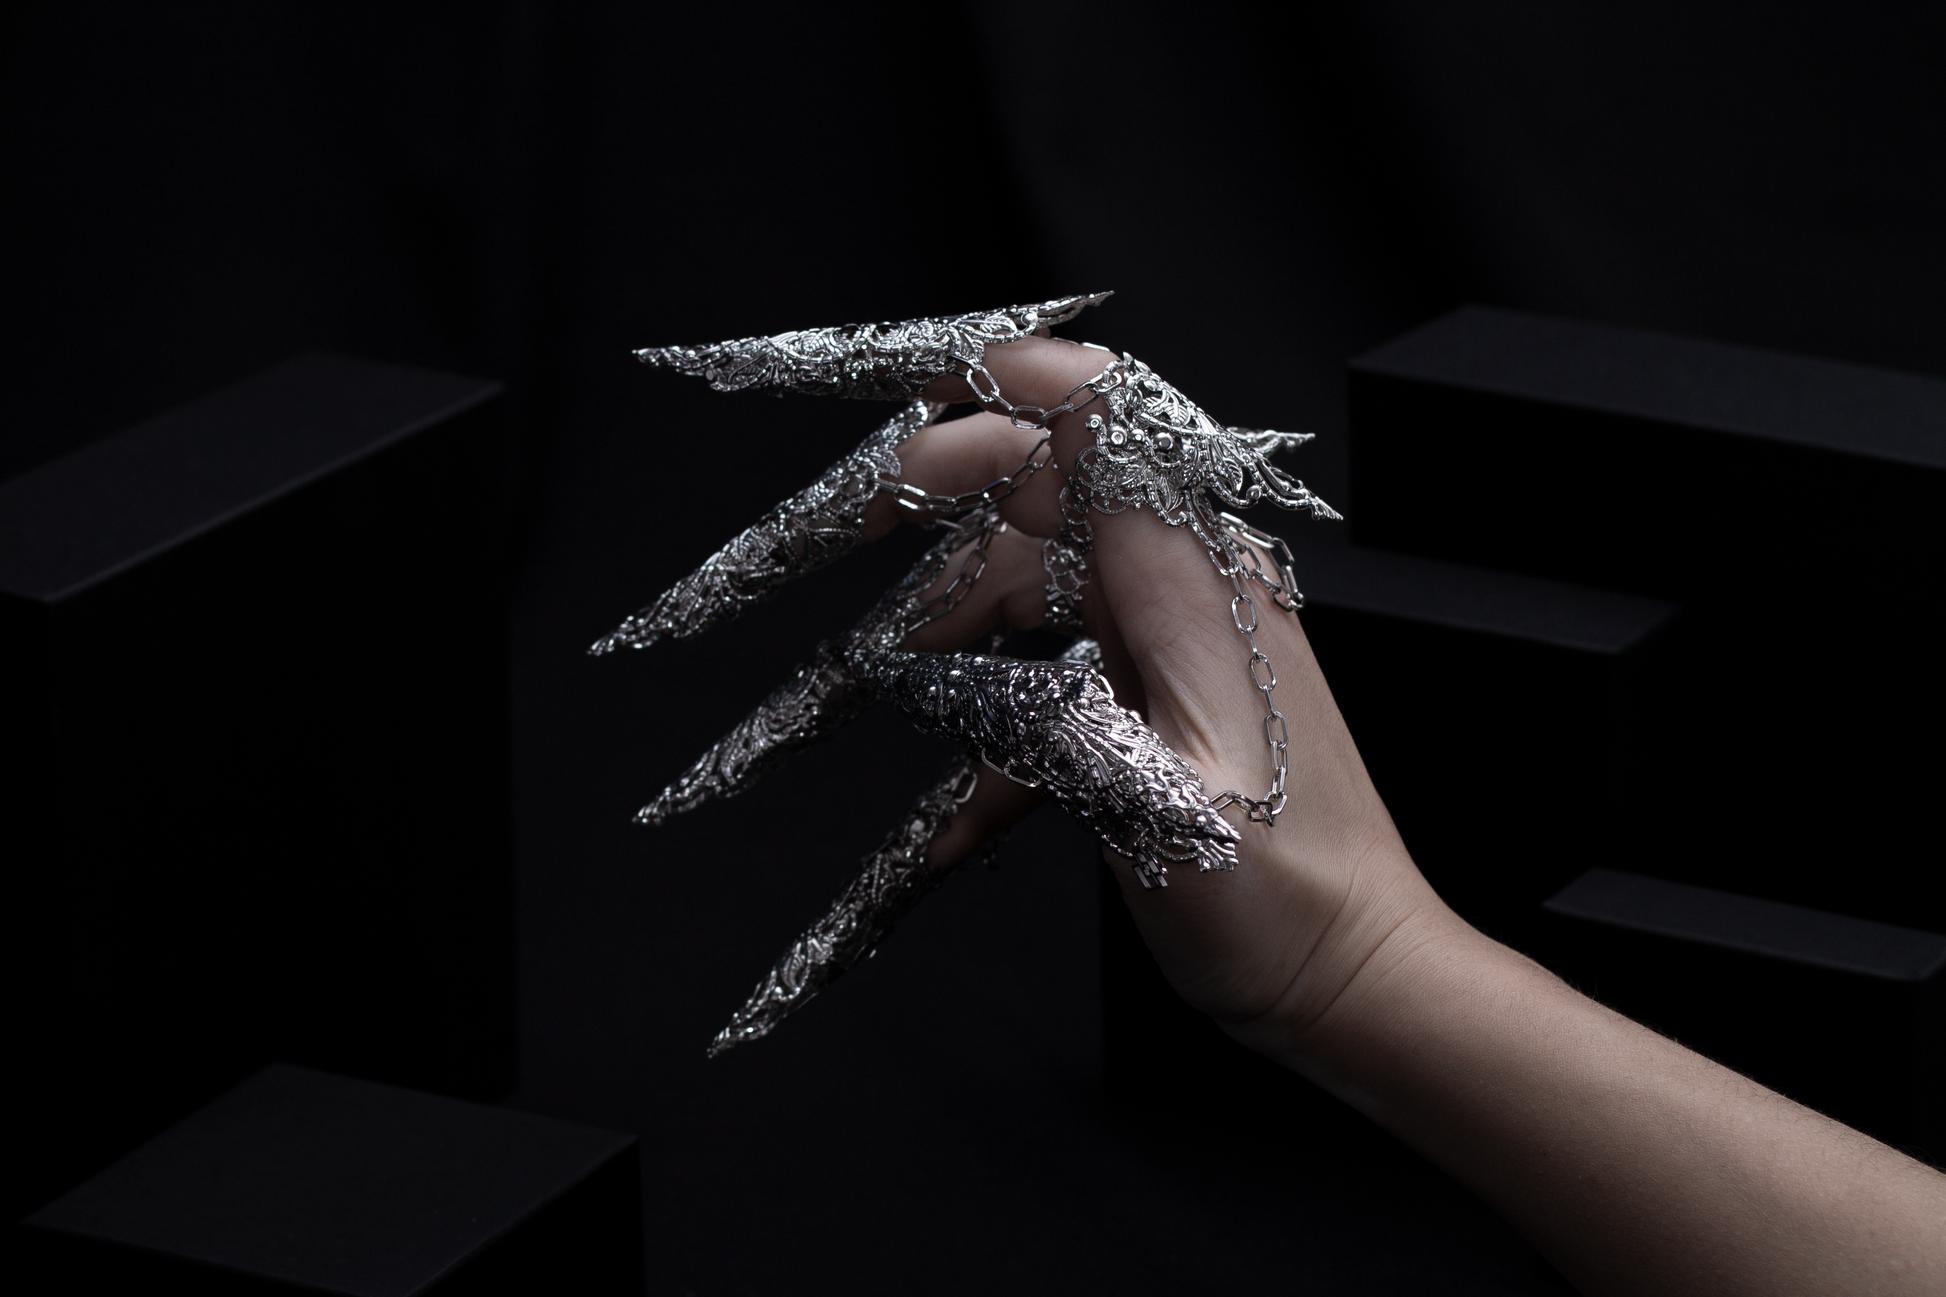 A hand is dramatically transformed with Myril Jewels' full set of dragon-like long claw rings, crafted with an intricate silver design. These neo-goth masterpieces are a perfect match for anyone passionate about bold, dark, avant-garde fashion, and make a statement at any gothic, festival, or Halloween event.